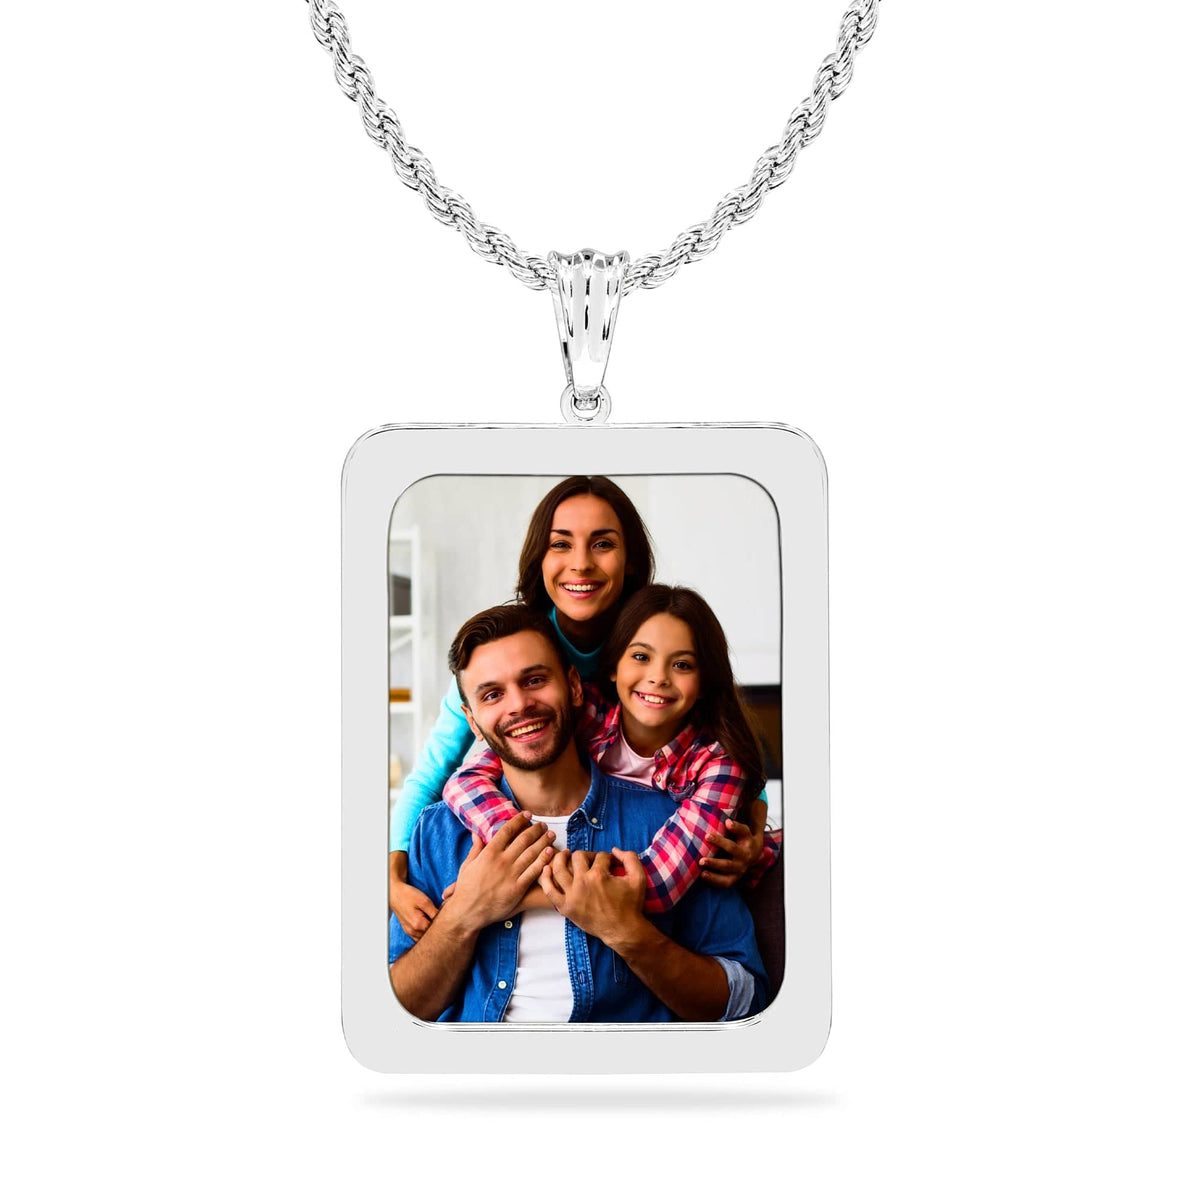 Stainless Steel / Rope Chain High Polished Rectangle Photo Pendant